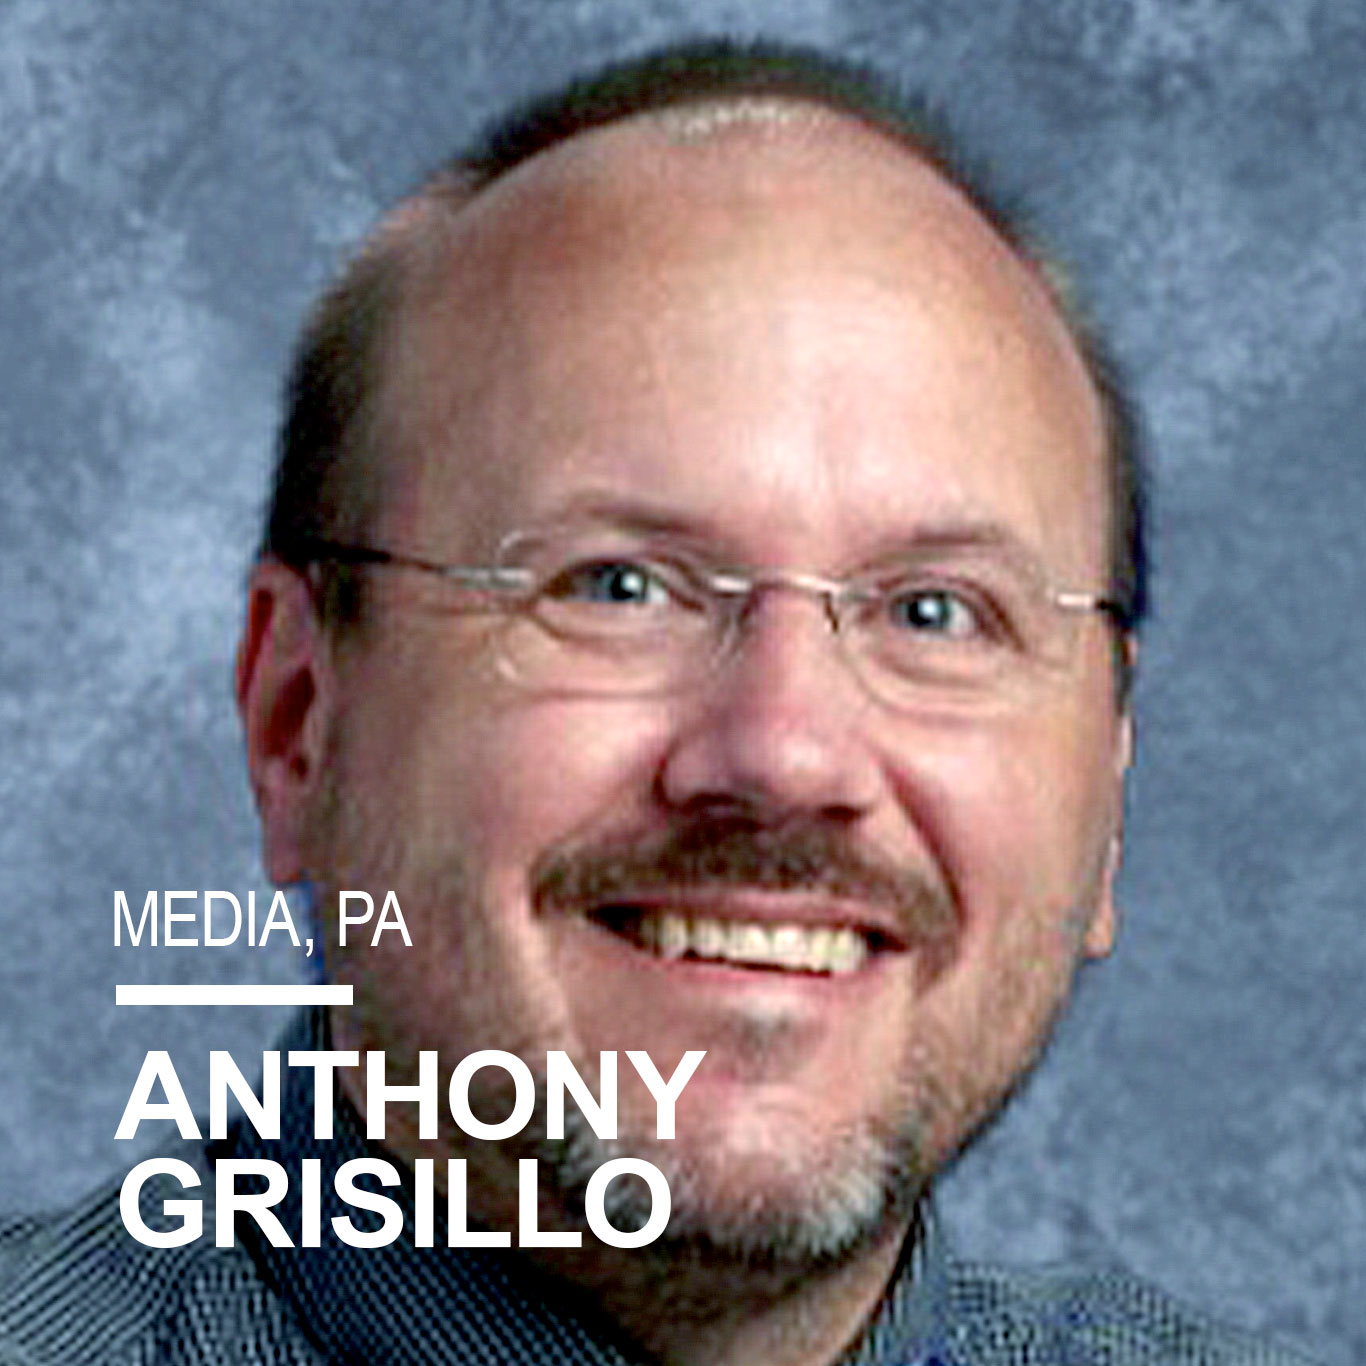 Anthony Grisillo is the 2014/15 Pennsylvania Teacher of the Year, a 2014 Making a Difference Award winner, and a Voya National STEM Fellowship Master Teacher. Currently in his 25th year of teaching, he’s the Teacher Librarian and AV Coordinator at Glenwood Elementary School in Media, PA, and an adjunct professor at West Chester University. Anthony is known for fanning the flames of curiosity in his students, and he loves witnessing their aha moments. When he’s not teaching, he likes to explore this amazing planet with his wife, Becca, and daughters, Christina and Danielle.